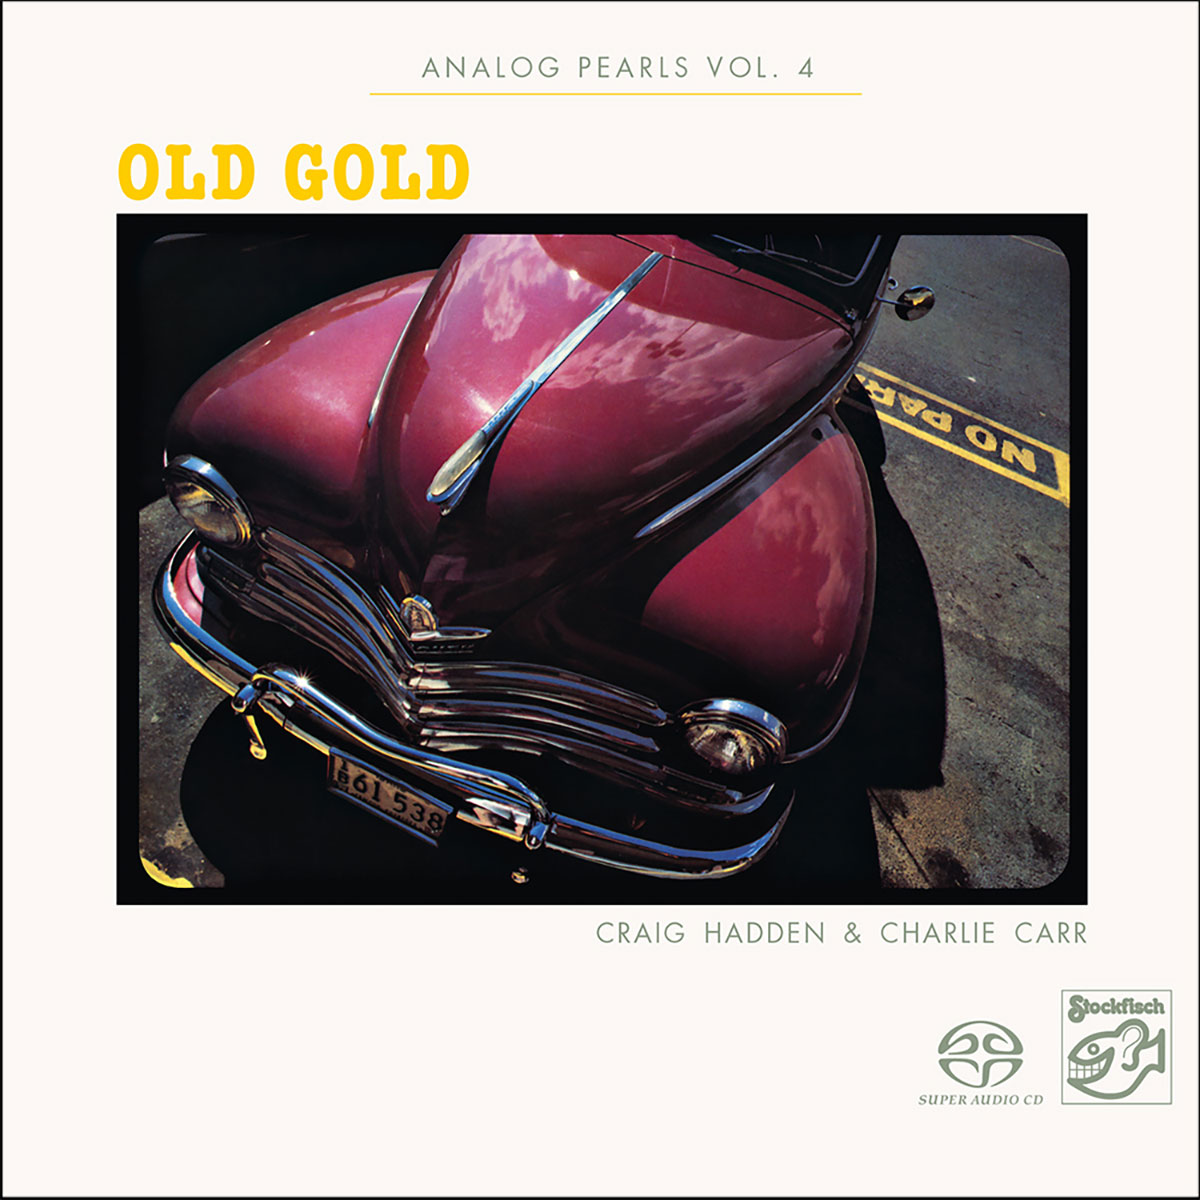 Analog Pearls Vol. 4 - Old Gold